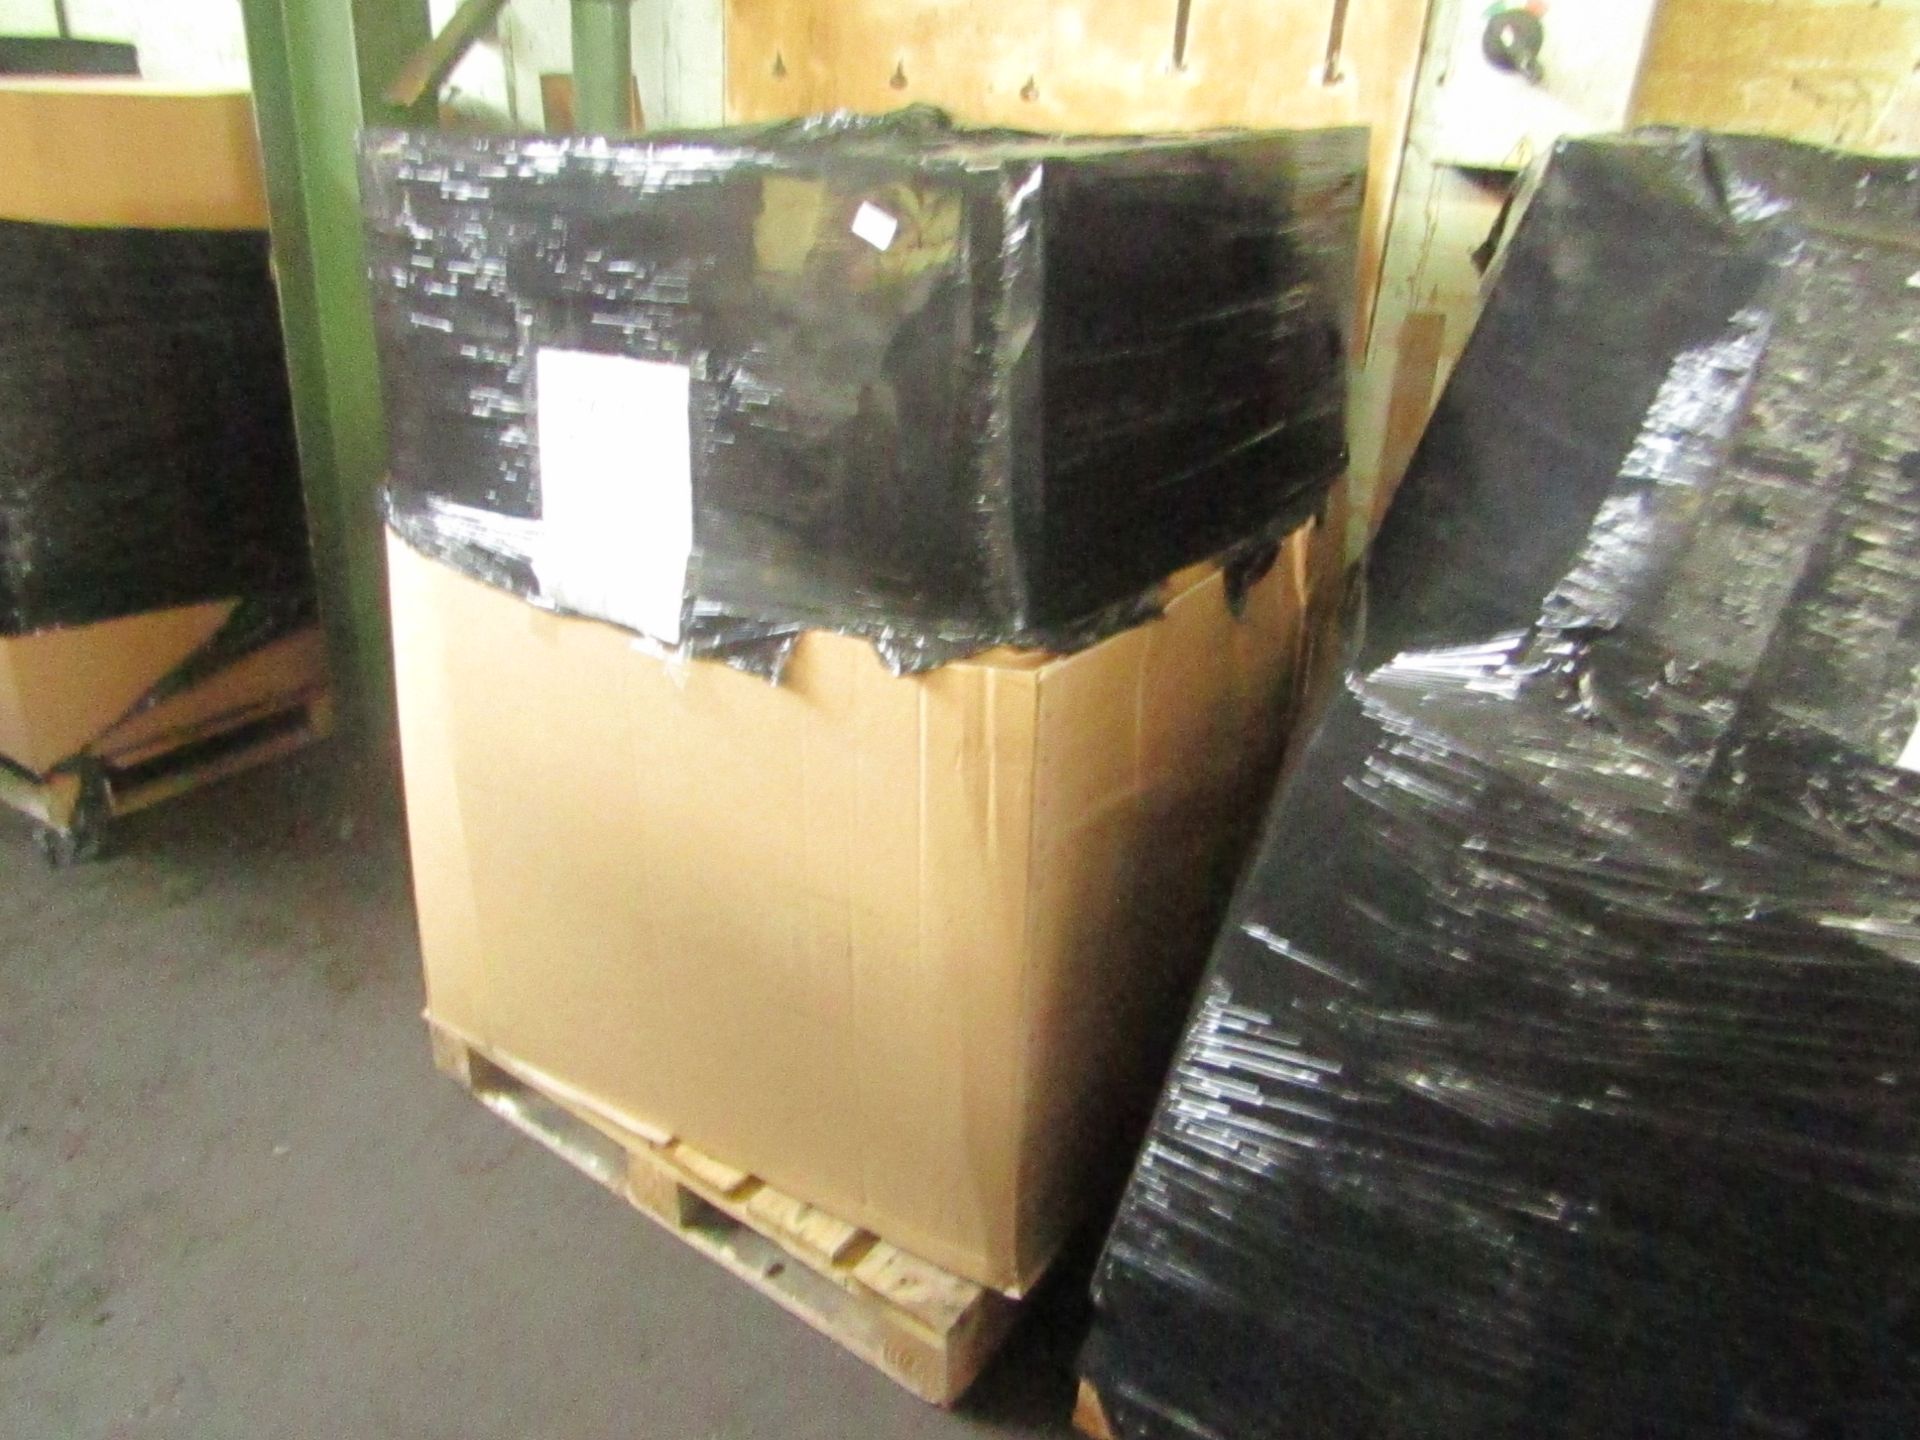 | 1X | PALLET CONTAINING CUSTOMER RETURN SIXTY FRIDGES MINI FRIDGES | PALLETS ARE UNCHECKED SO NO